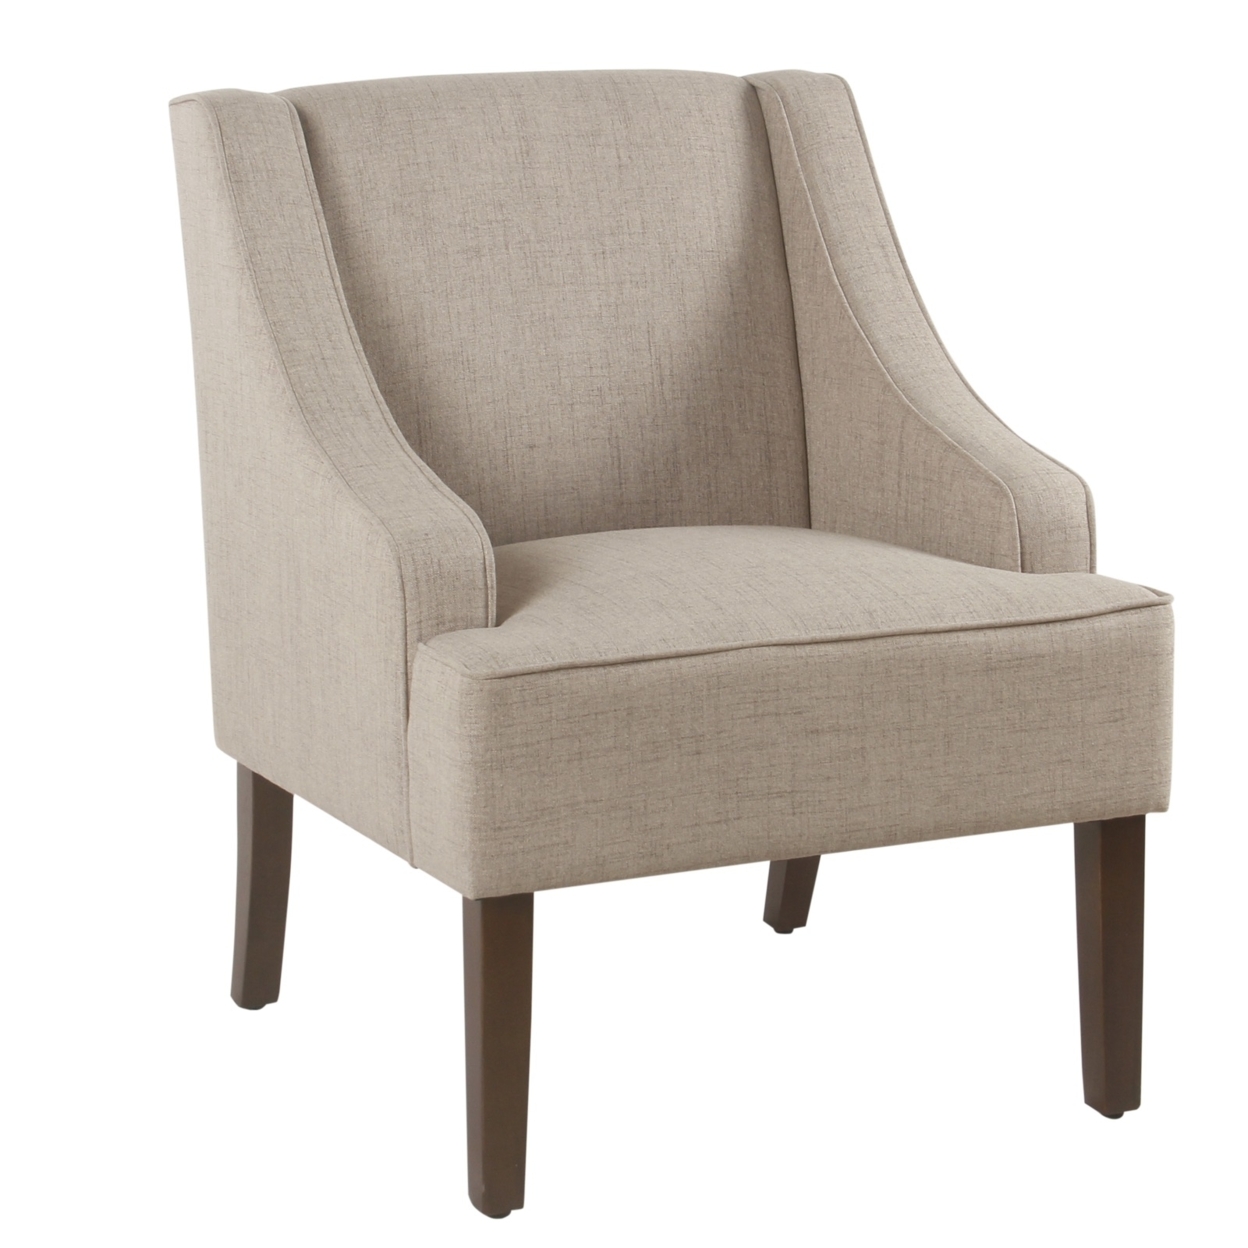 Fabric Upholstered Wooden Accent Chair With Swooping Armrests, Beige And Brown- Saltoro Sherpi